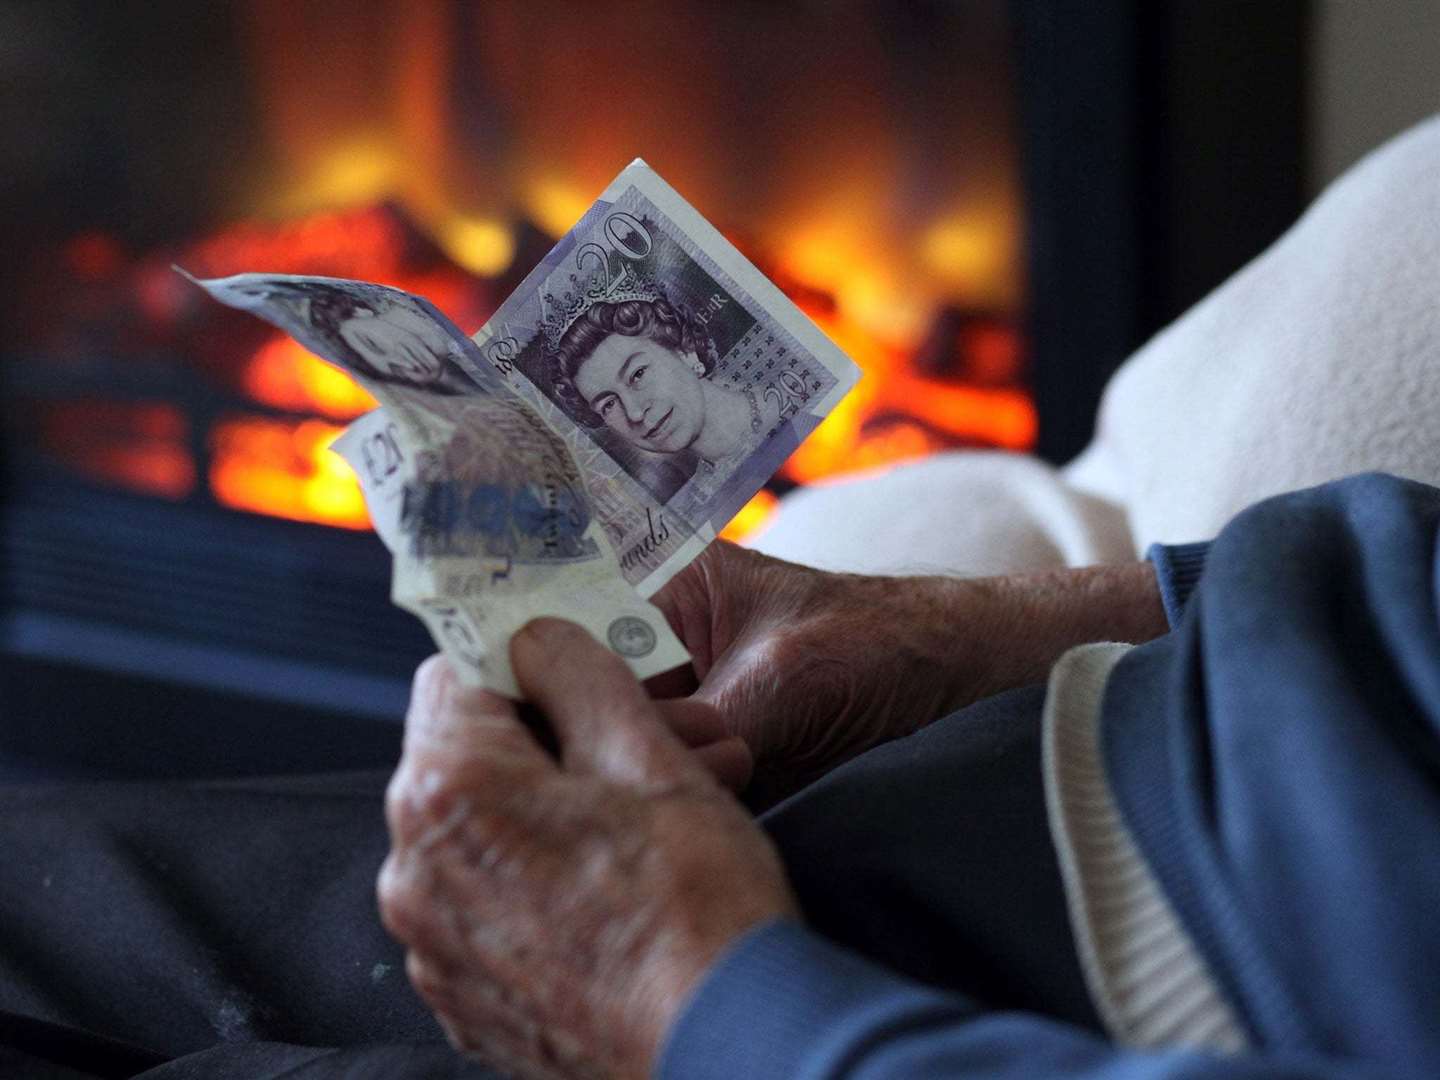 There are growing concerns more people will fall into fuel poverty as energy bills continue to rise.